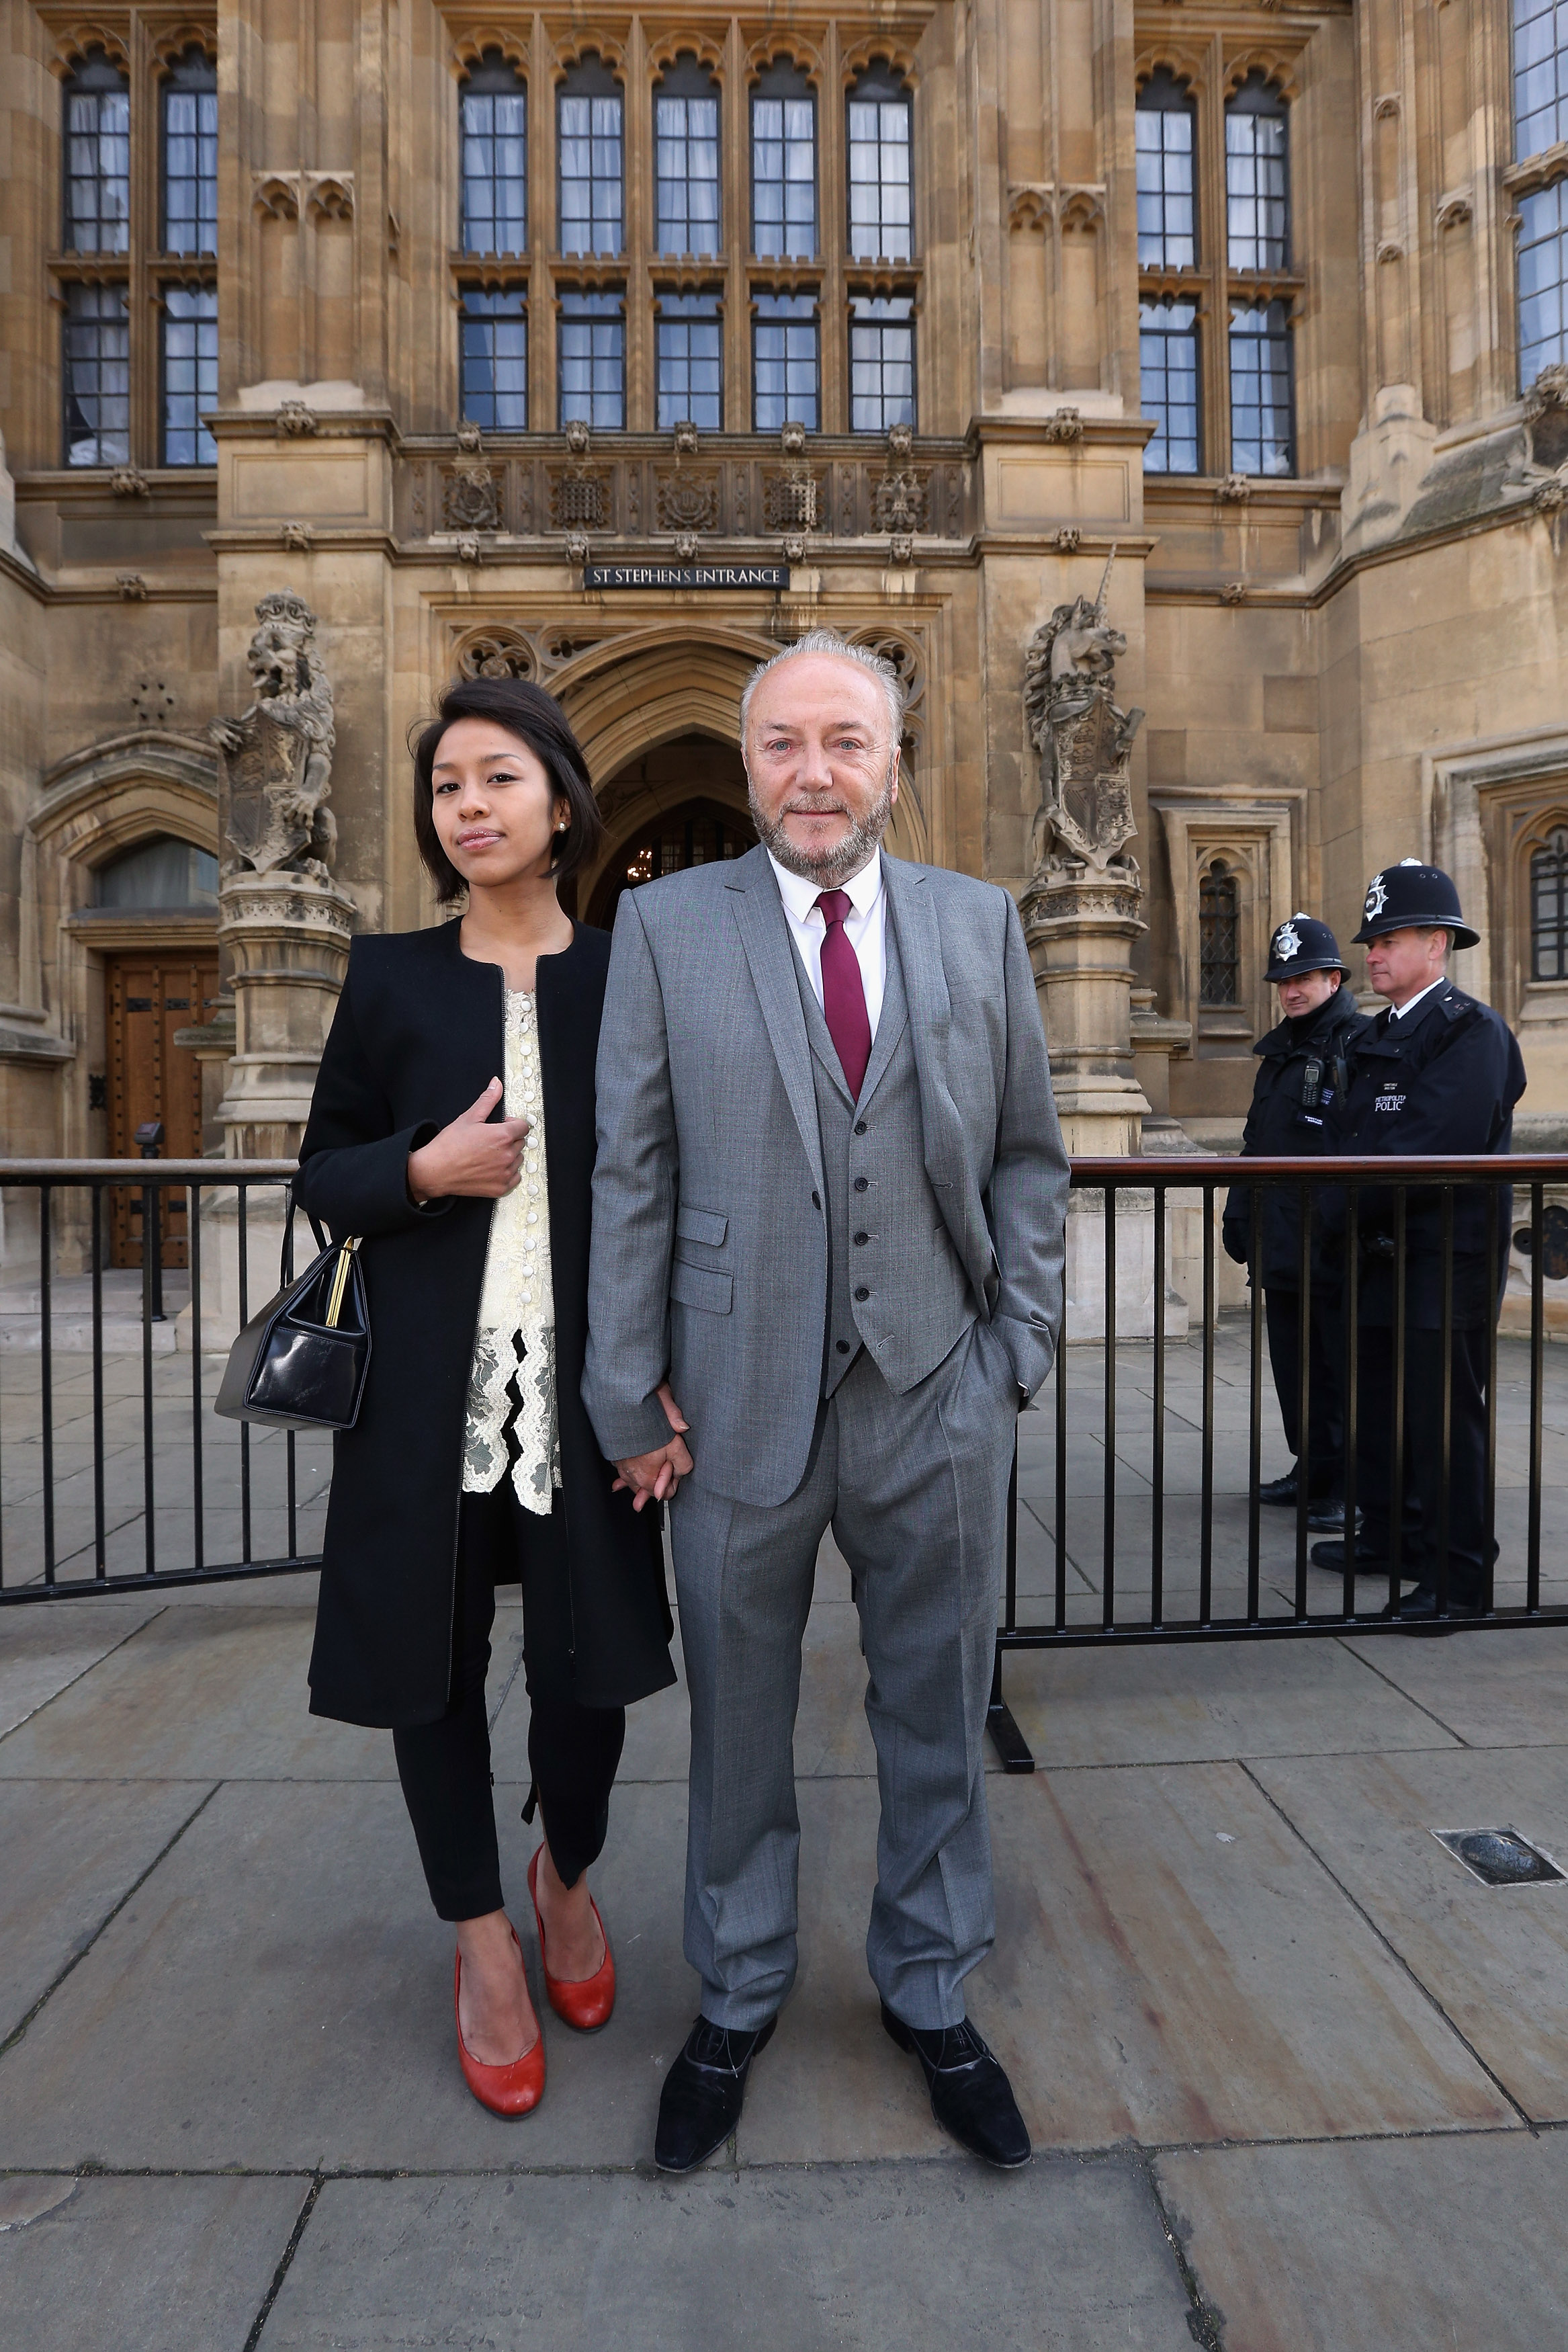 George Galloway posing for a photograph with his wife Putri Gayatri Pertiwi in front of the Houses of Parliament on April 16, 2012